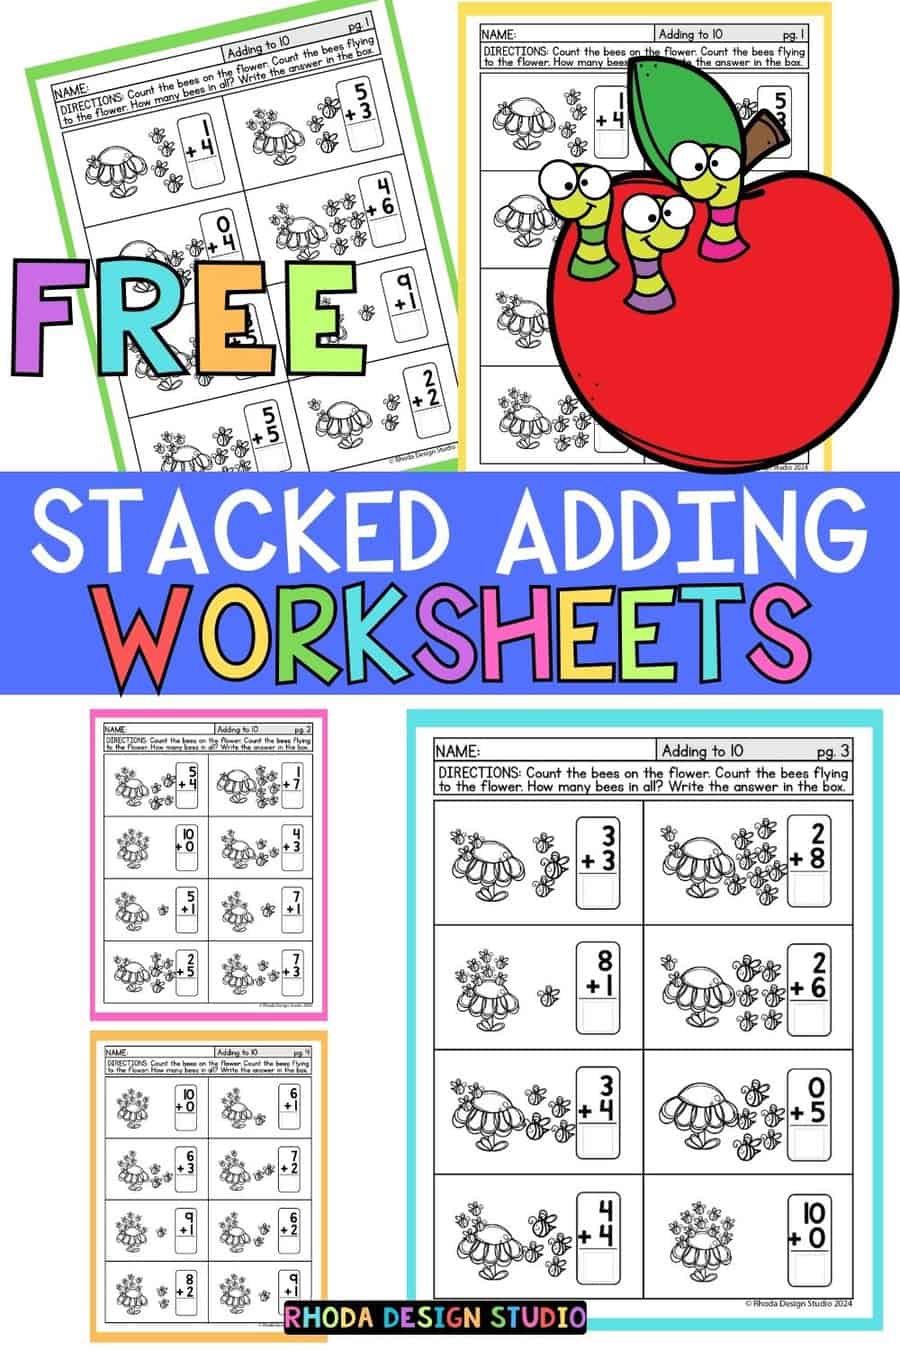 Stacked Addition Up to 10: Free Worksheets